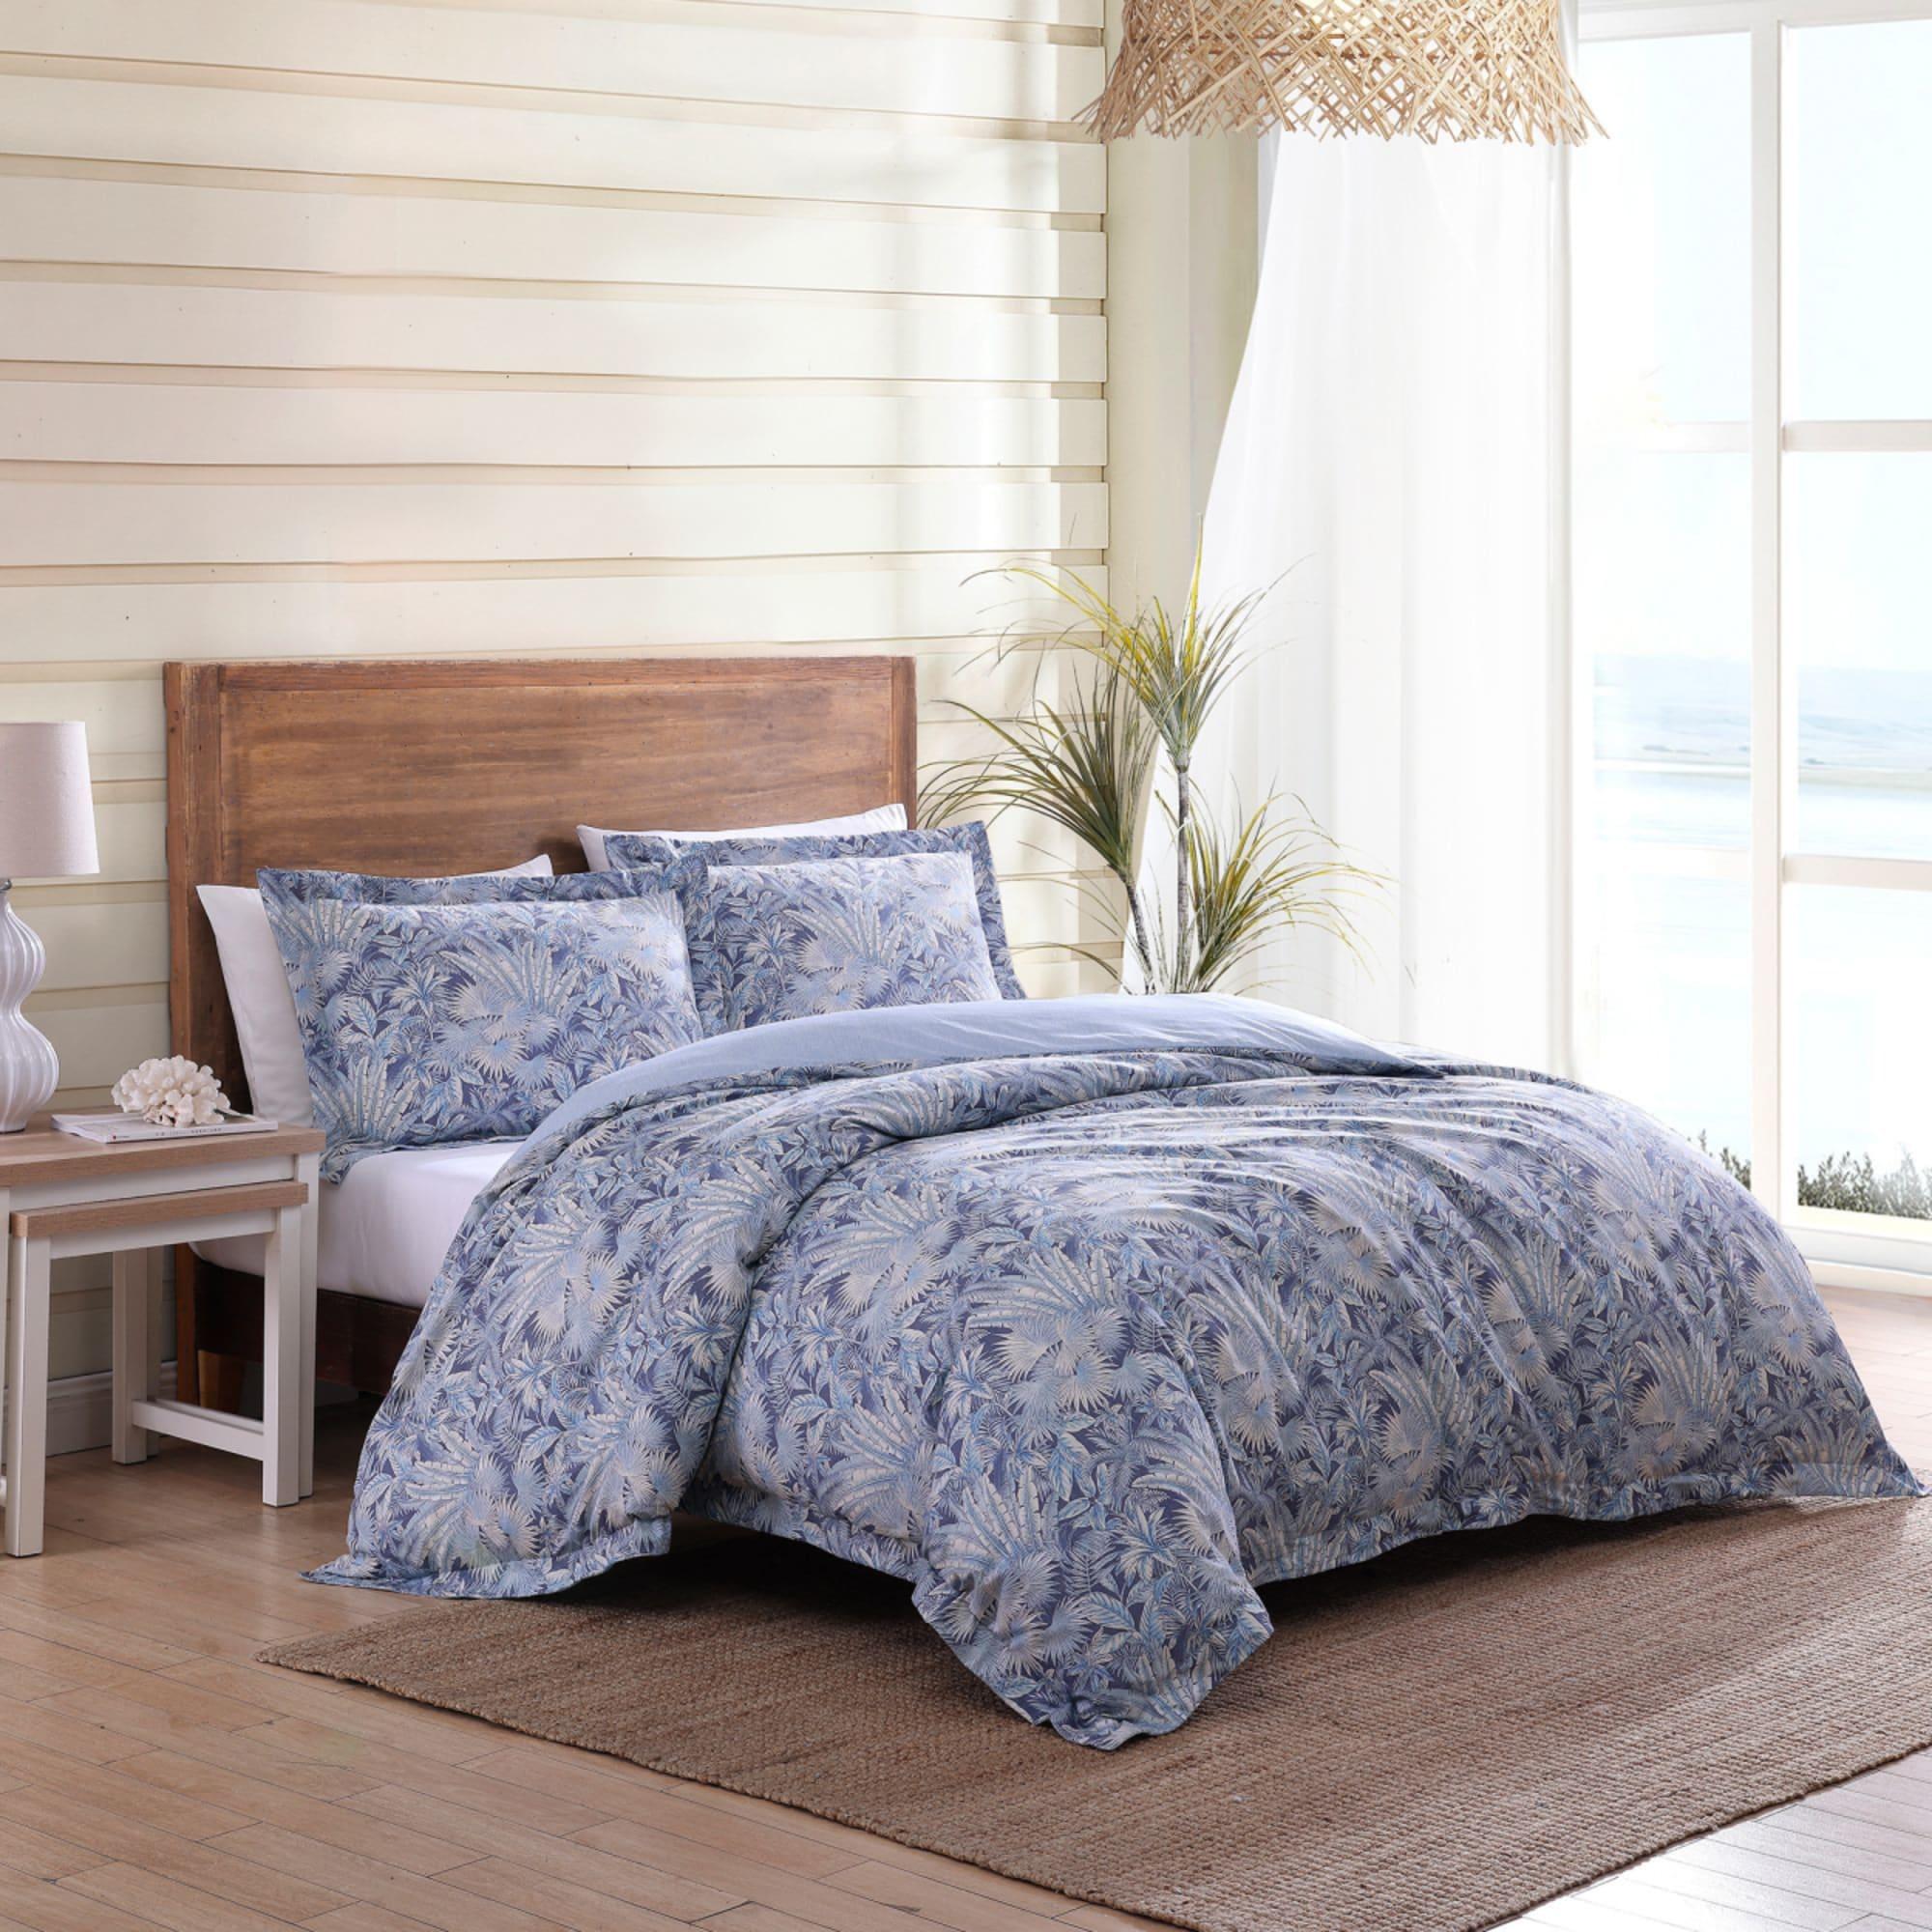 Tommy Bahama Bahamian Quilt Cover Set Queen Image 3